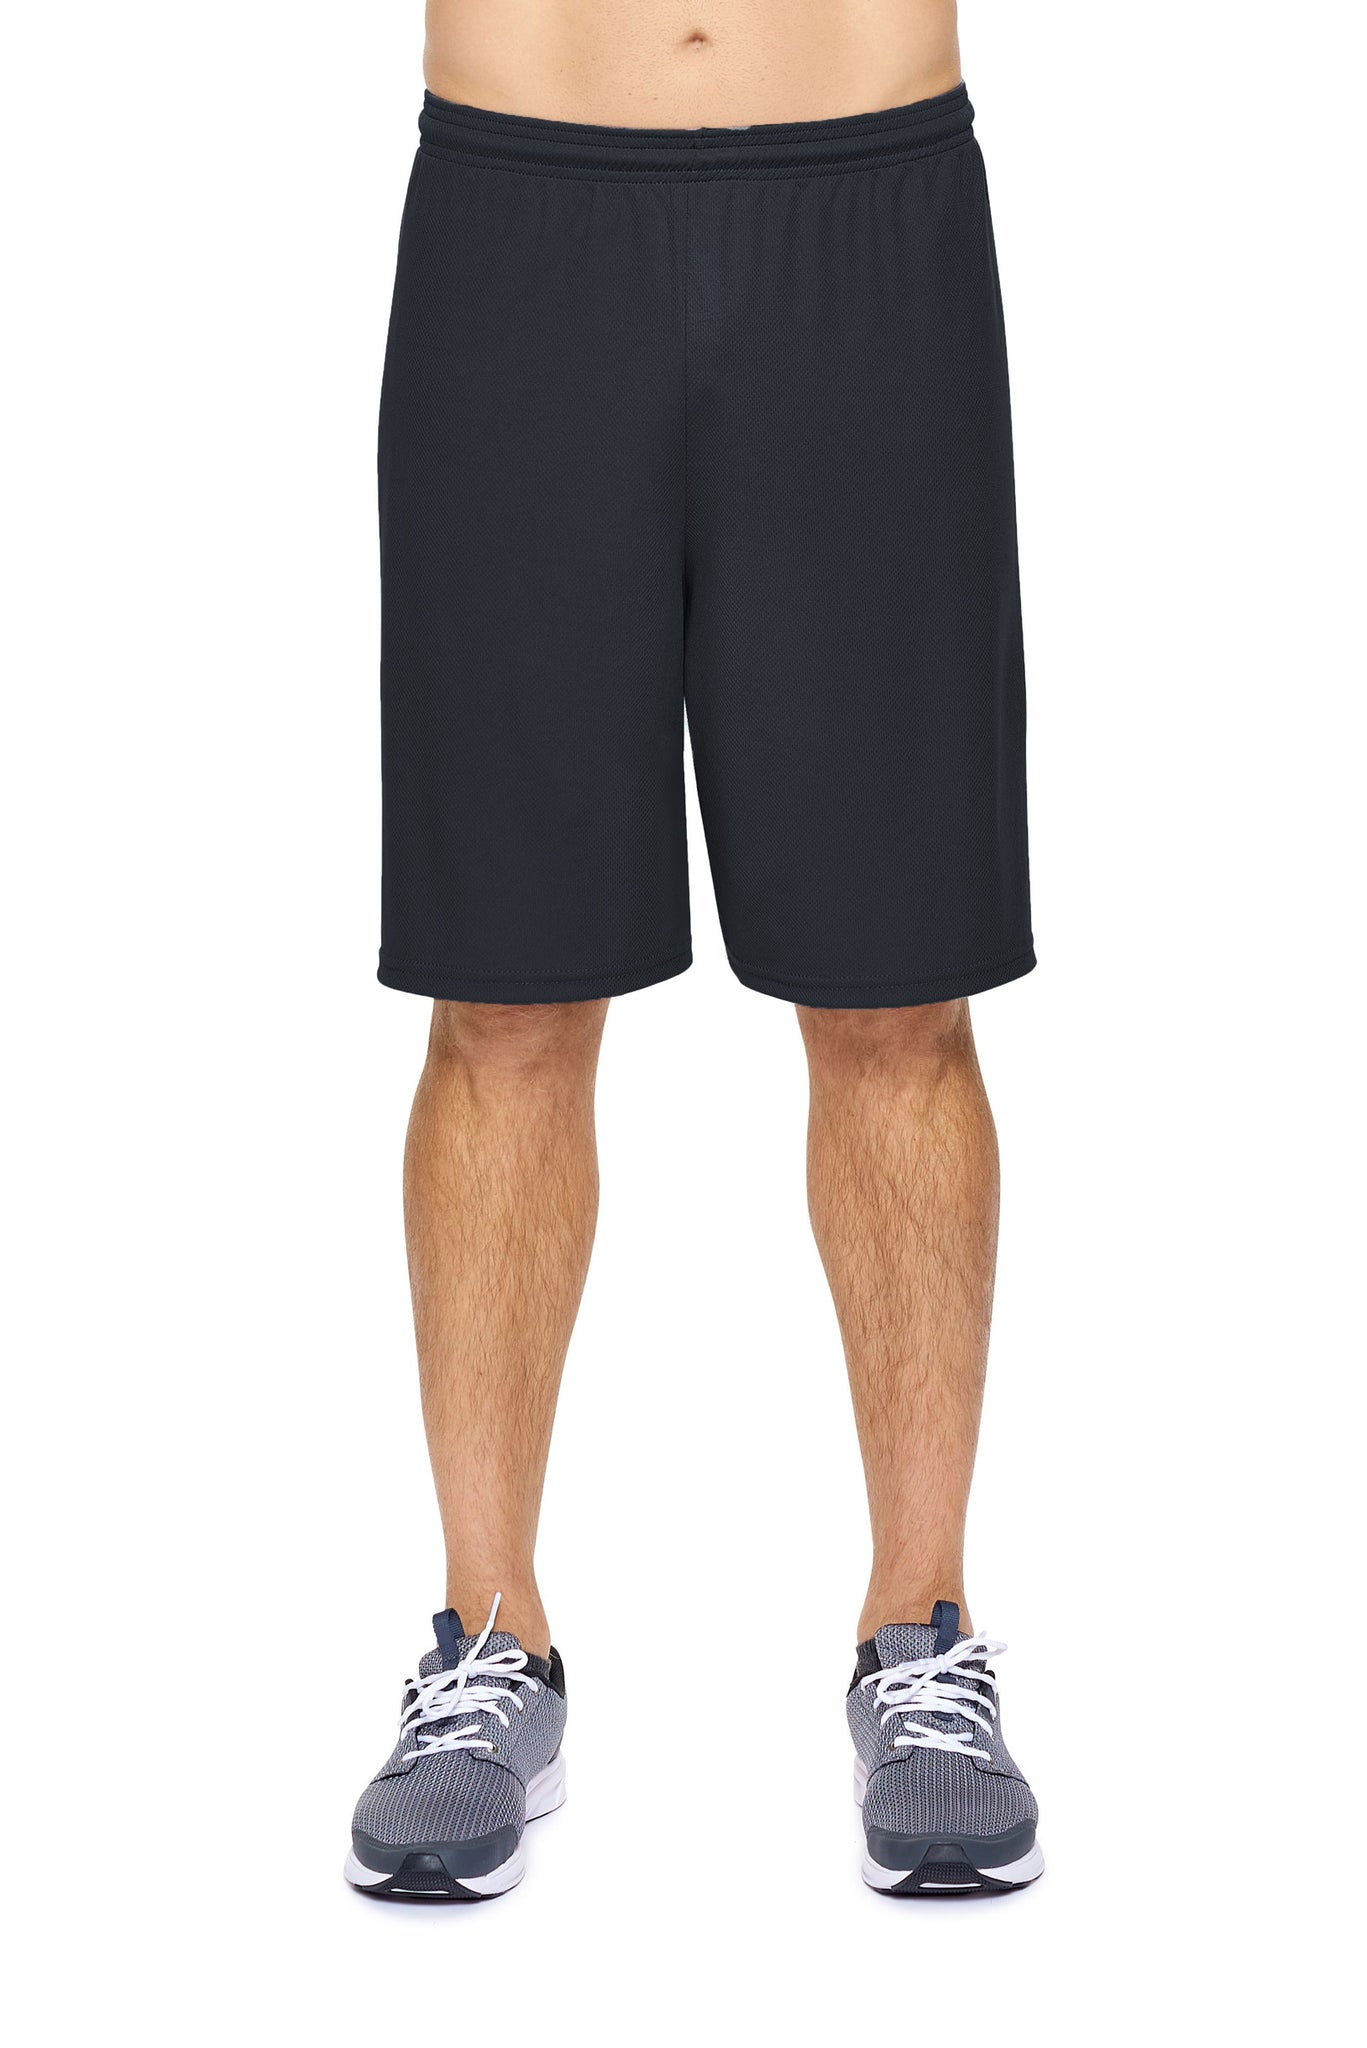 Expert Brand Wholesale Men's Fitness Shorts in Black Made in USA#black